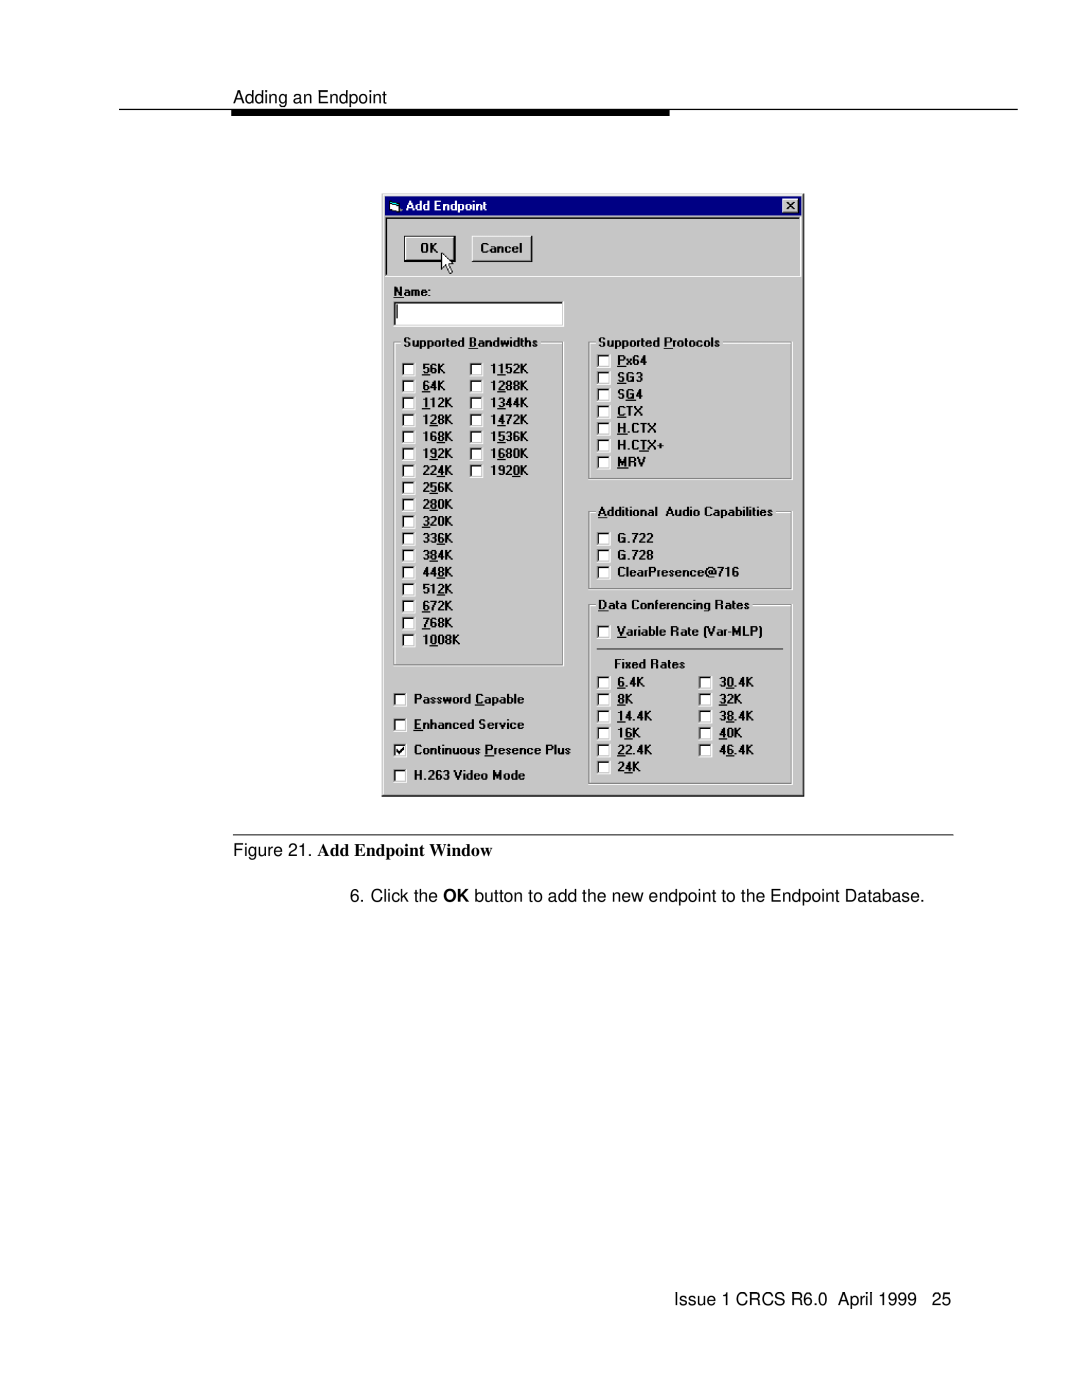 Lucent Technologies manual Adding an Endpoint, Add Endpoint Window, Issue 1 CRCS R6.0 April 1999 